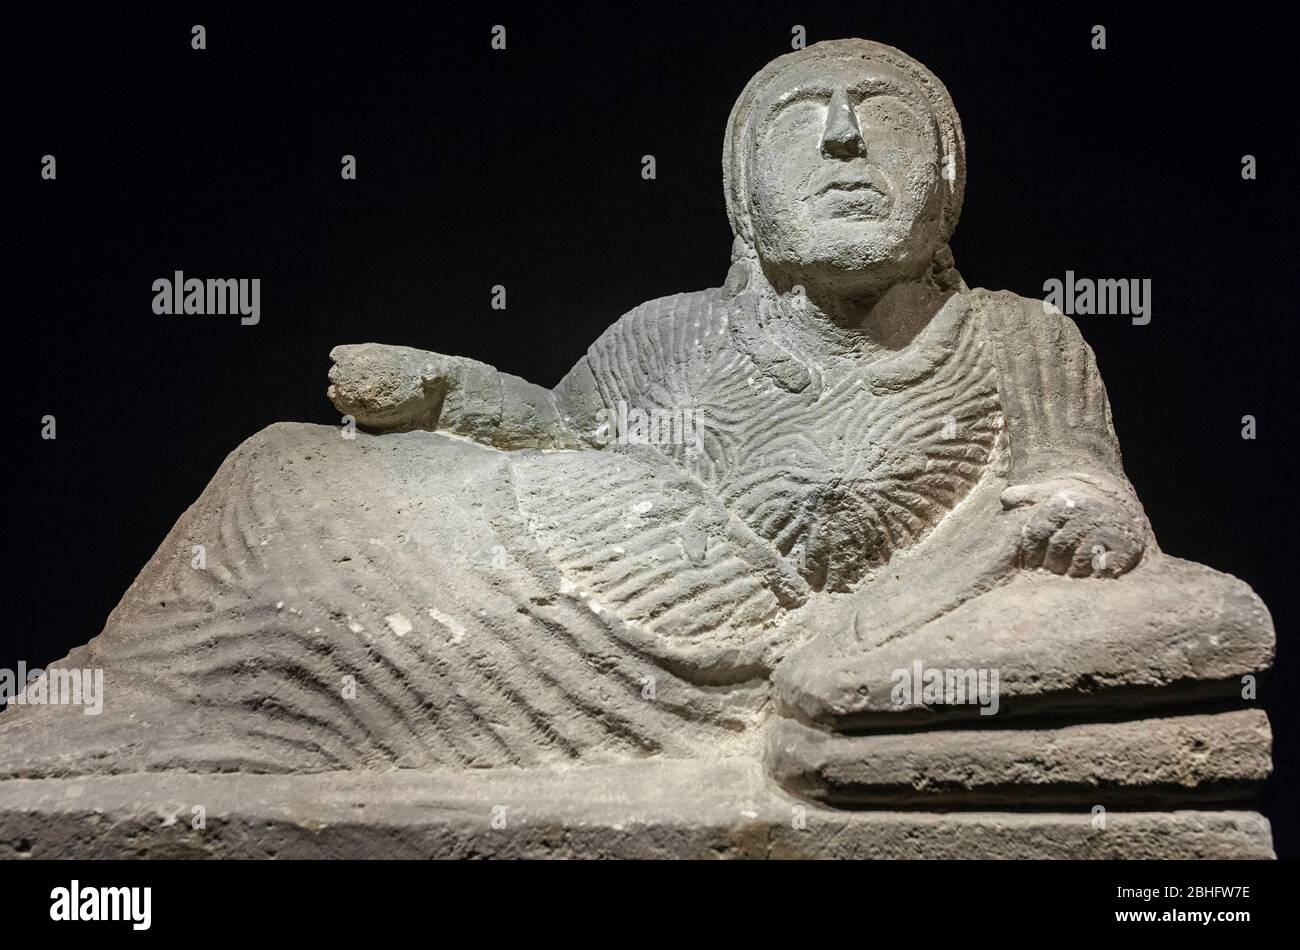 Barcelona, Spain - Dec 27th, 2019: Etruscan cineray urn on podium. Reclined female figure sculpted Stock Photo